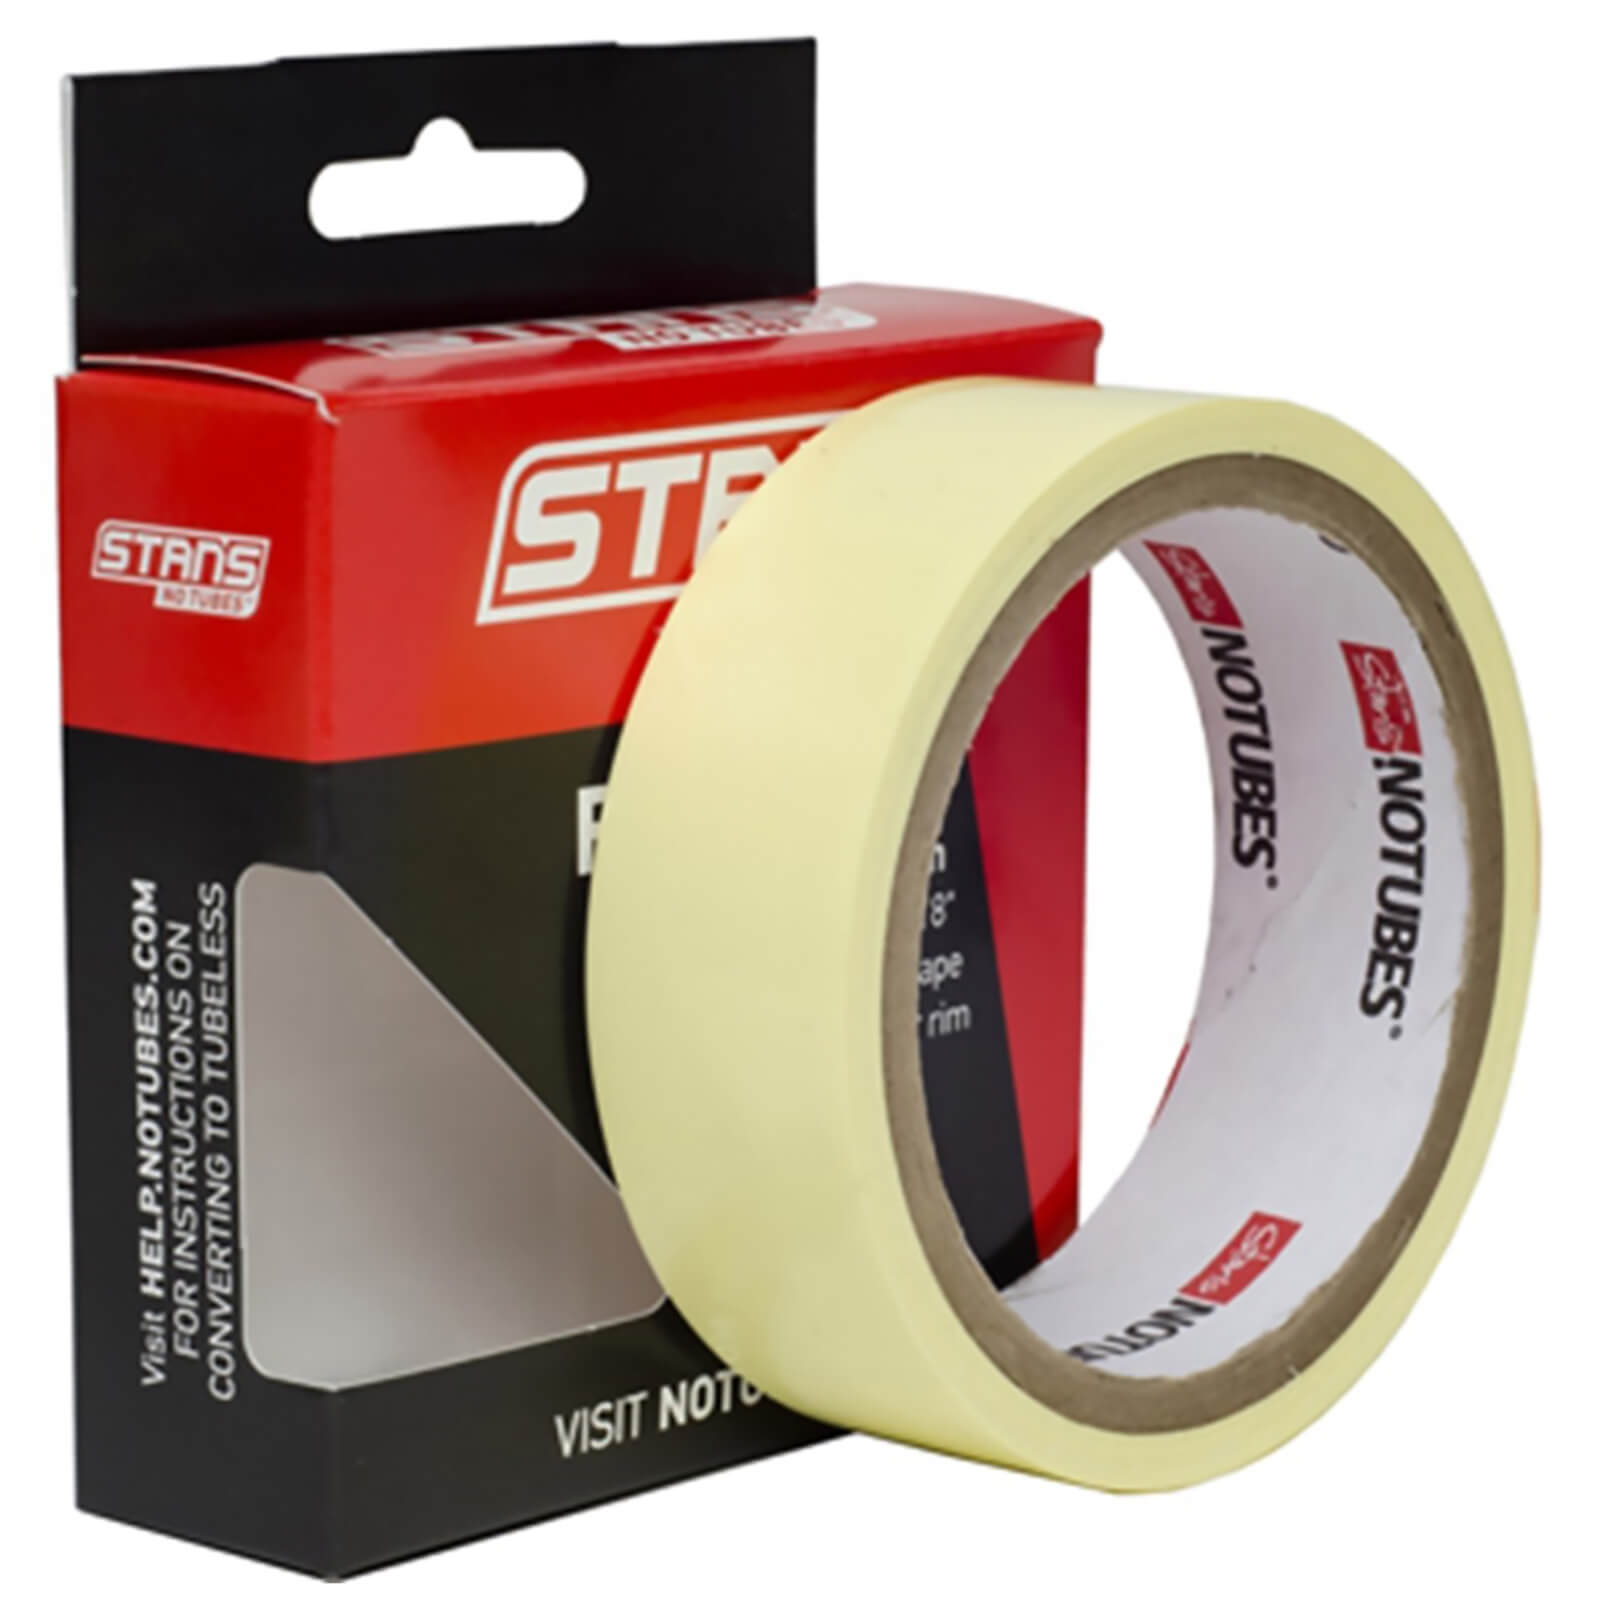 Image of Stans NoTubes 10 Yard Rim Tape - 10yd x 27mm